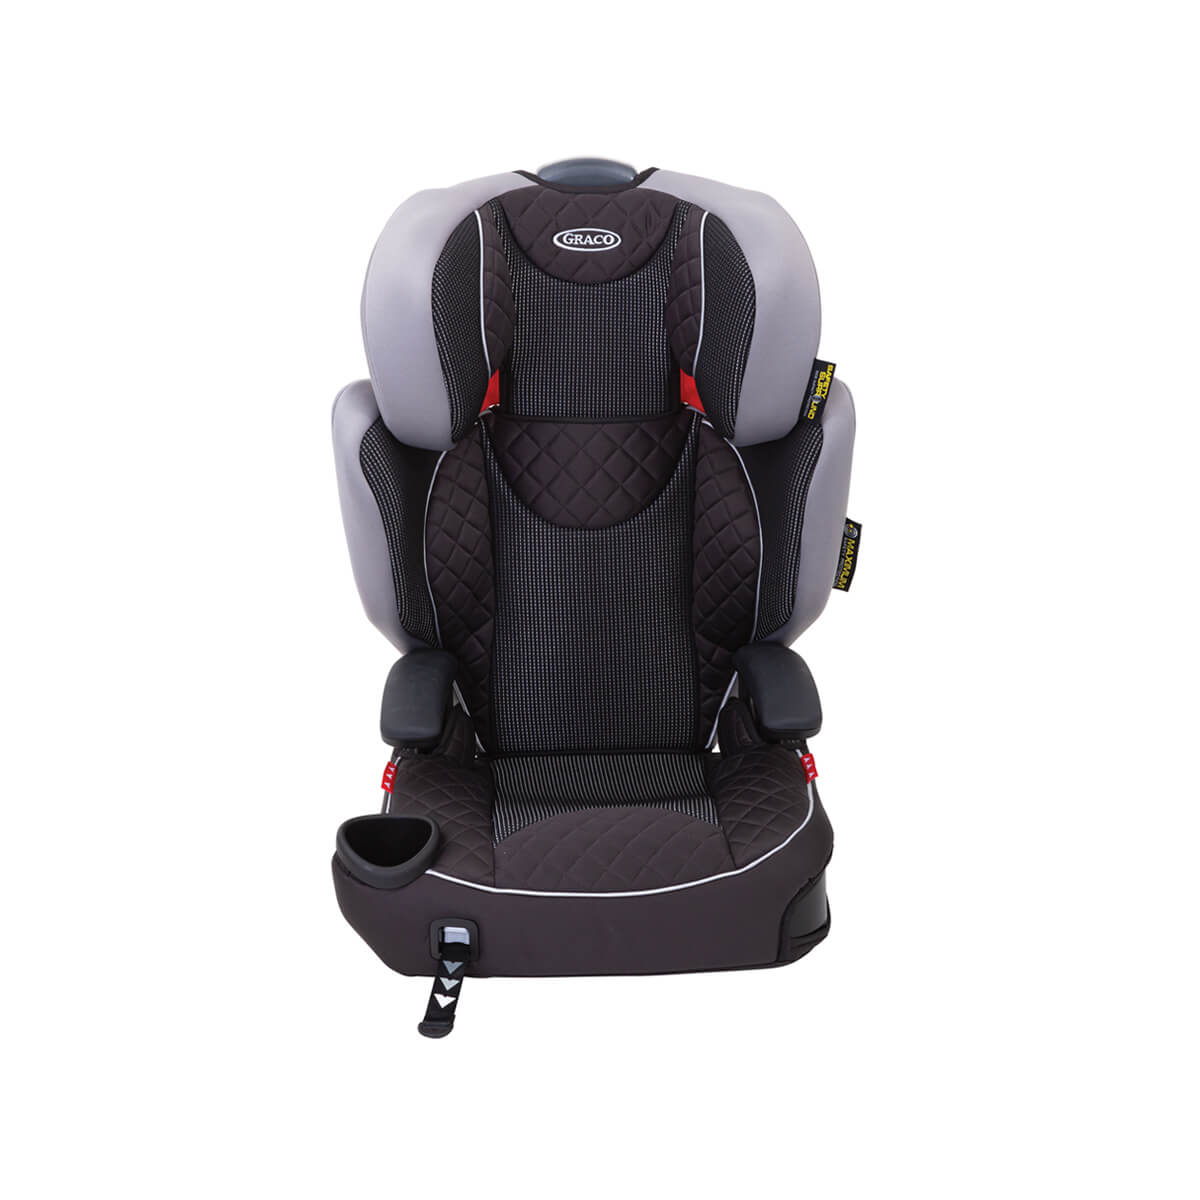 Graco Affix gray highback booster front angle